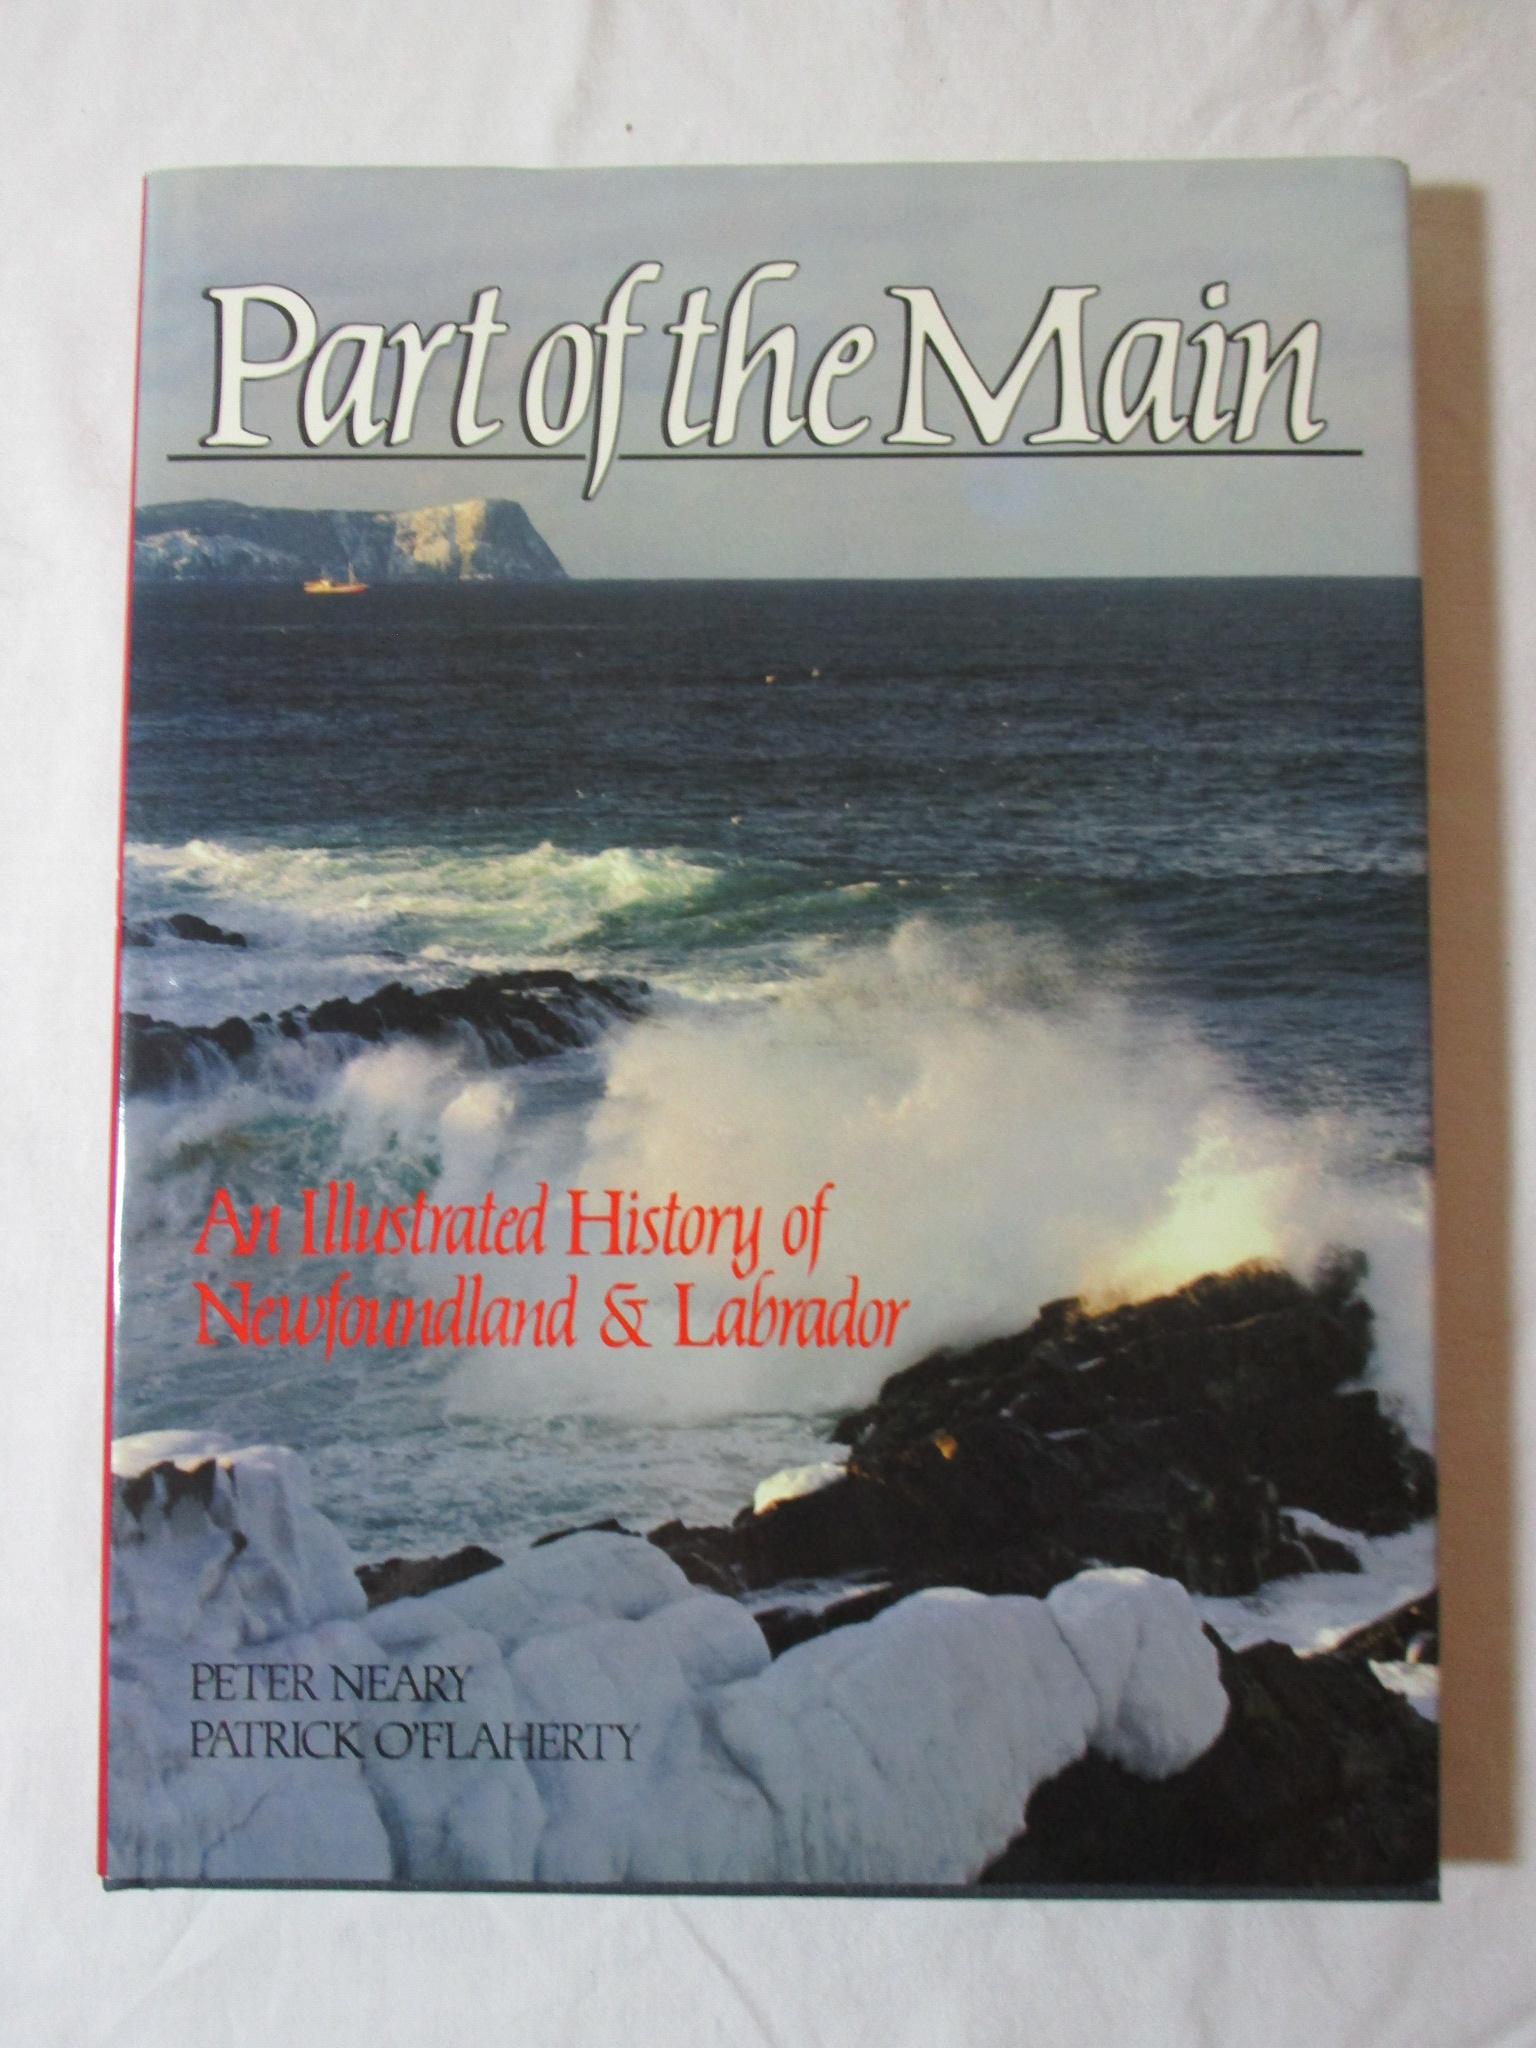 Part of the Main Hard:  An Illustrated History of Newfoundland & Labrador